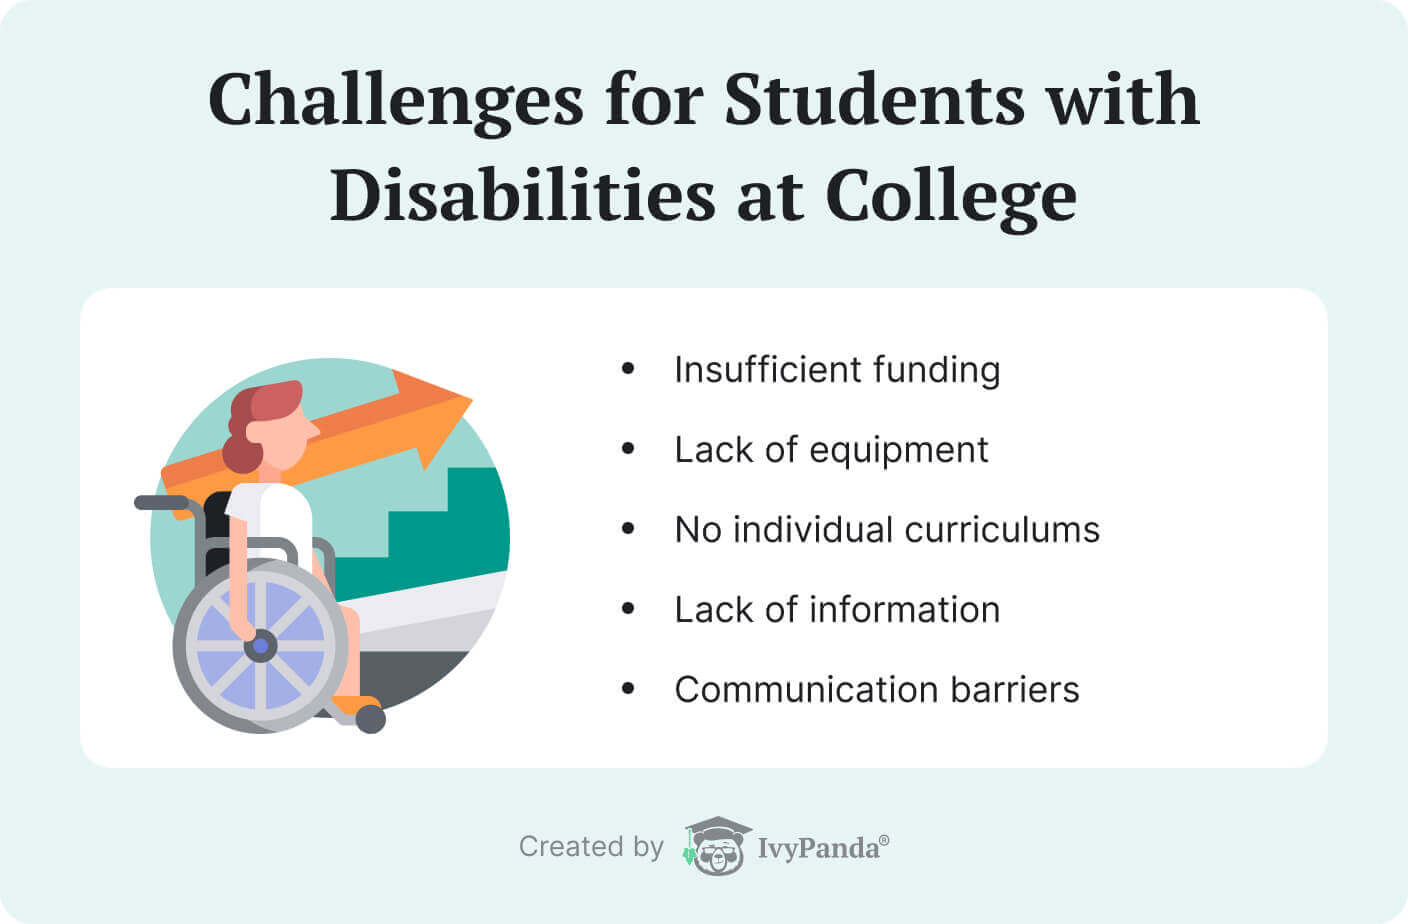 The picture lists the main challenges students with disabilities may face in college.